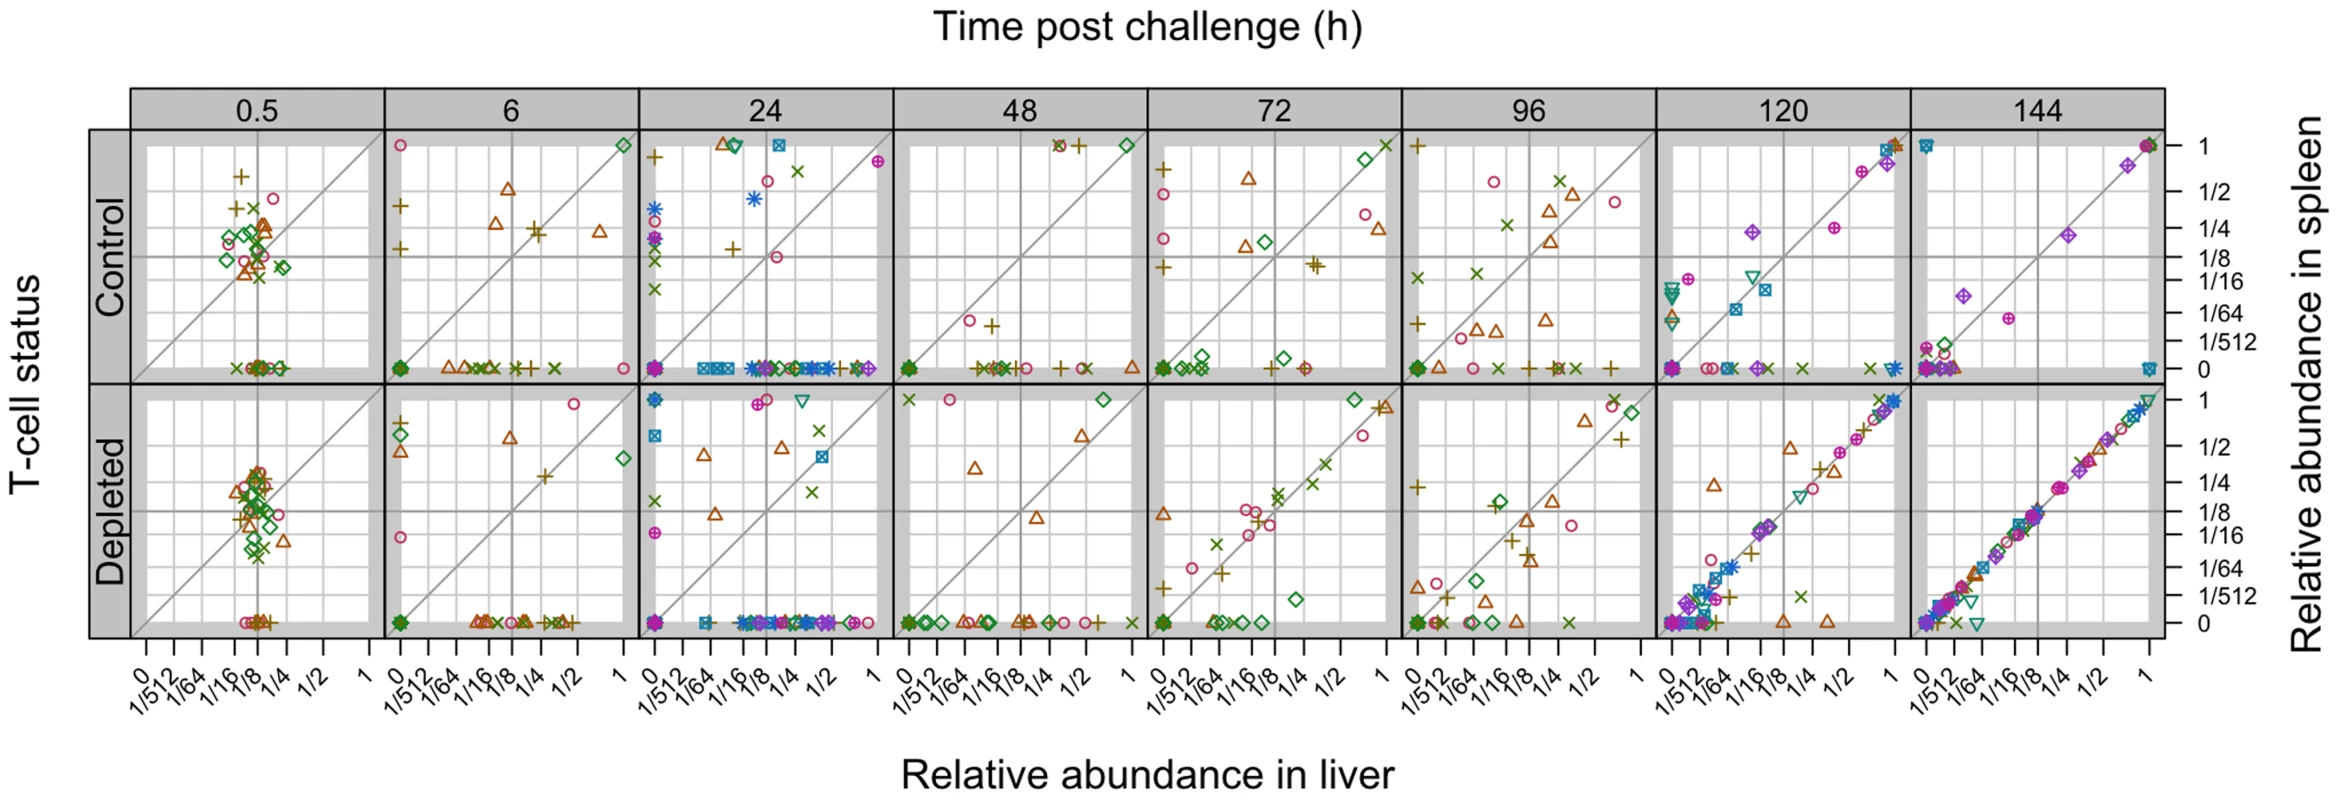 Relative abundance of individual WITS in the spleens and livers.